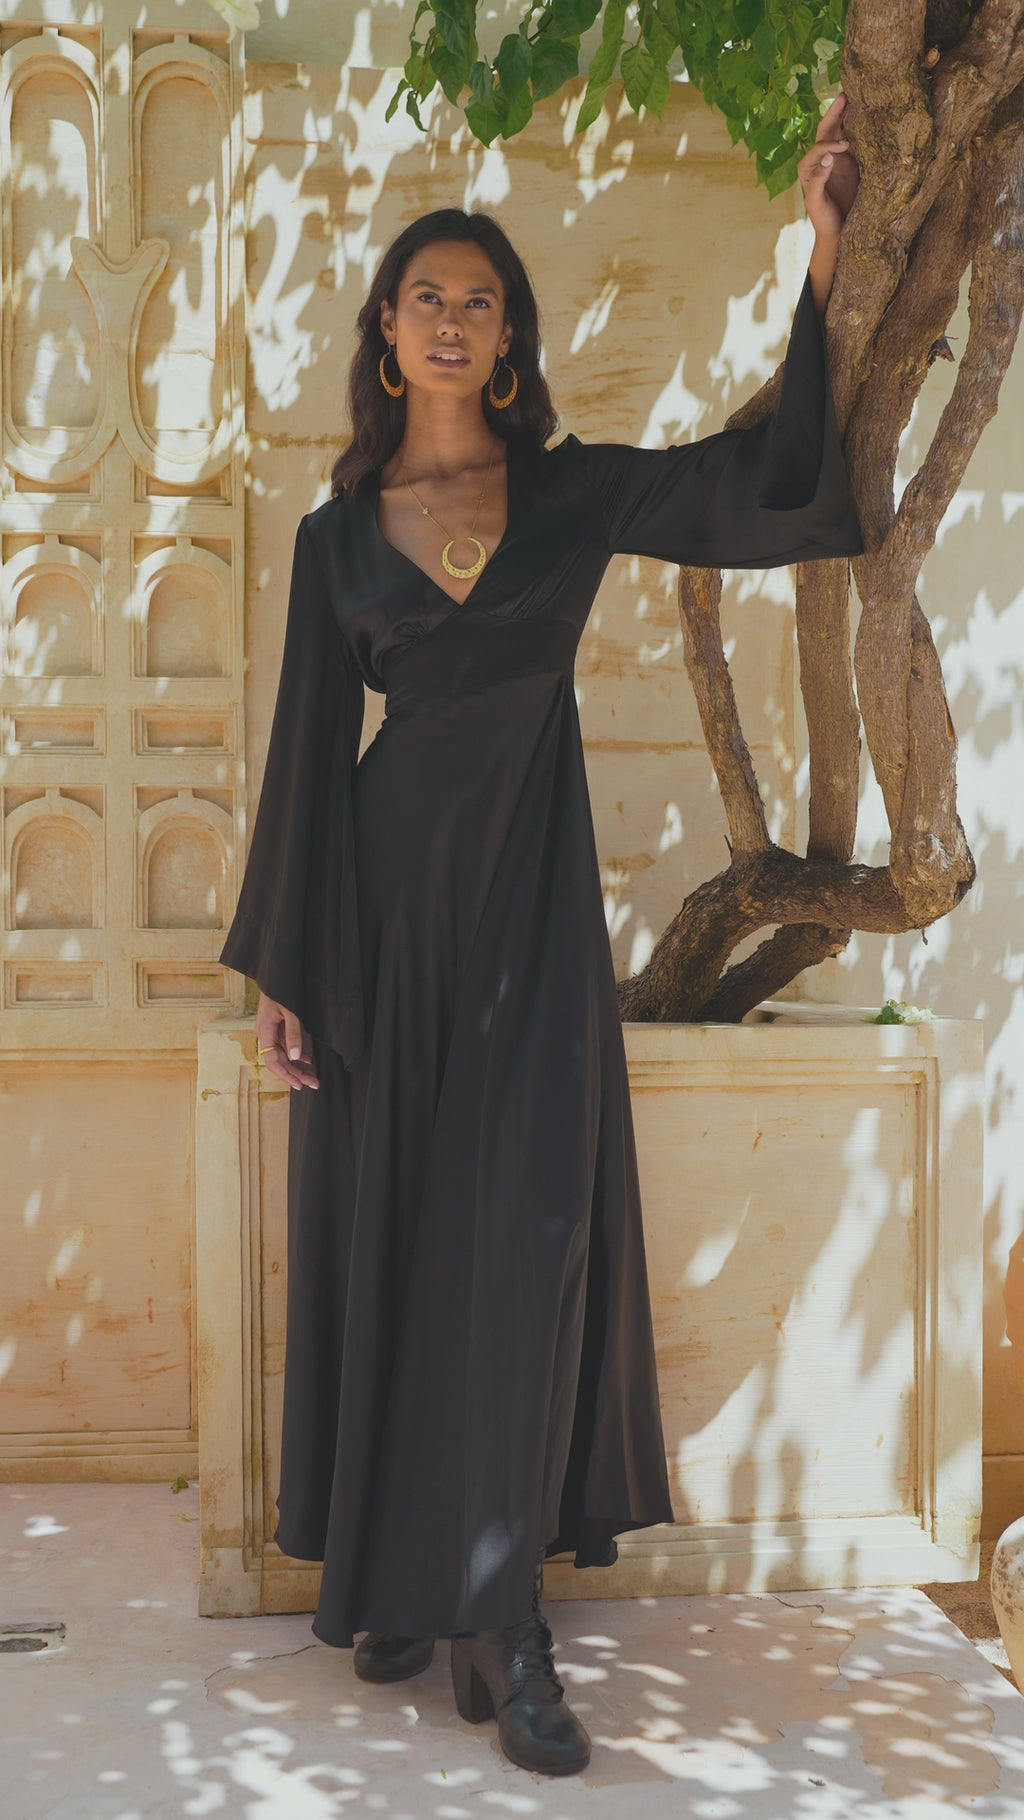 Explore the elegance of the Black Gloss Goddess Dress - a bohemian maxi dress with an open back and bell sleeves. Perfect for evening cocktails and formal occasions, crafted with ethically-sourced silk.